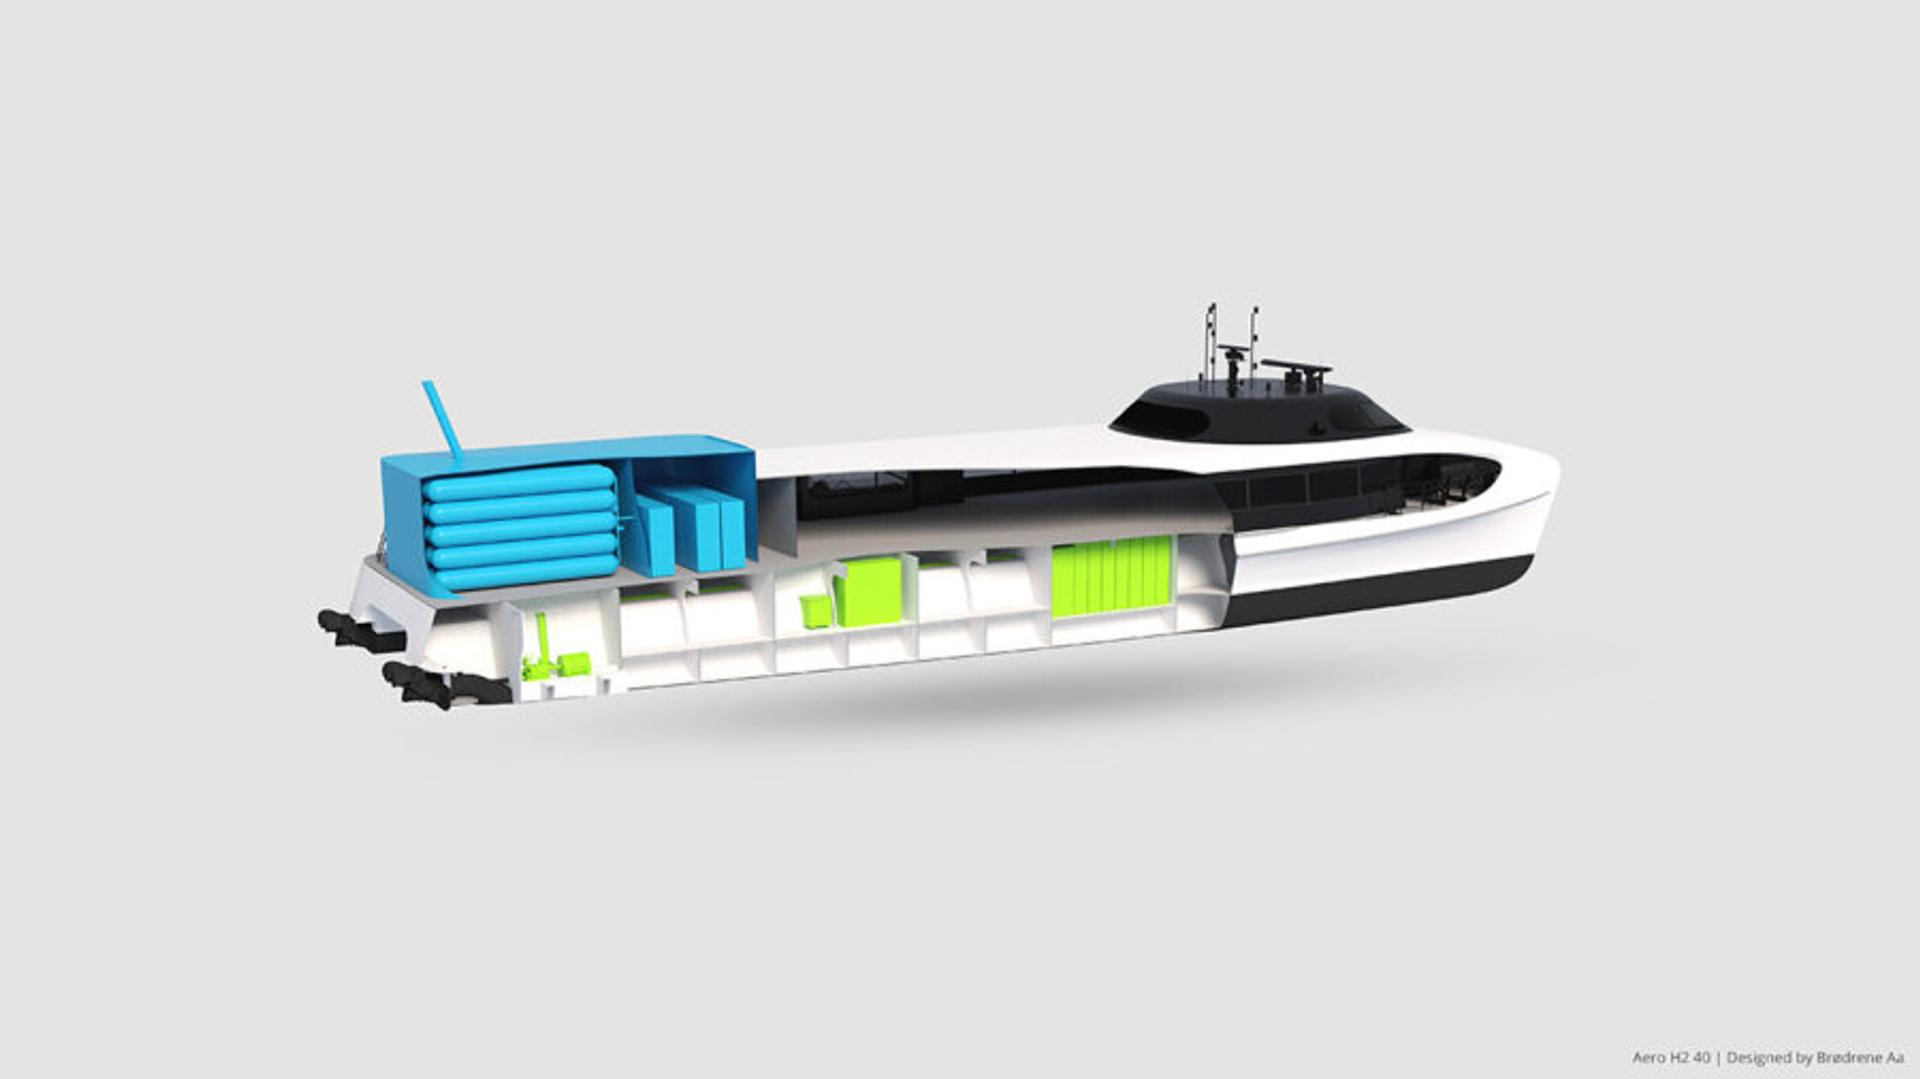 Illustration of the Aero40 H2 fast ferry, a collaboration between Brødrene AA, Boreal Norge and Westcon Power & Automation.